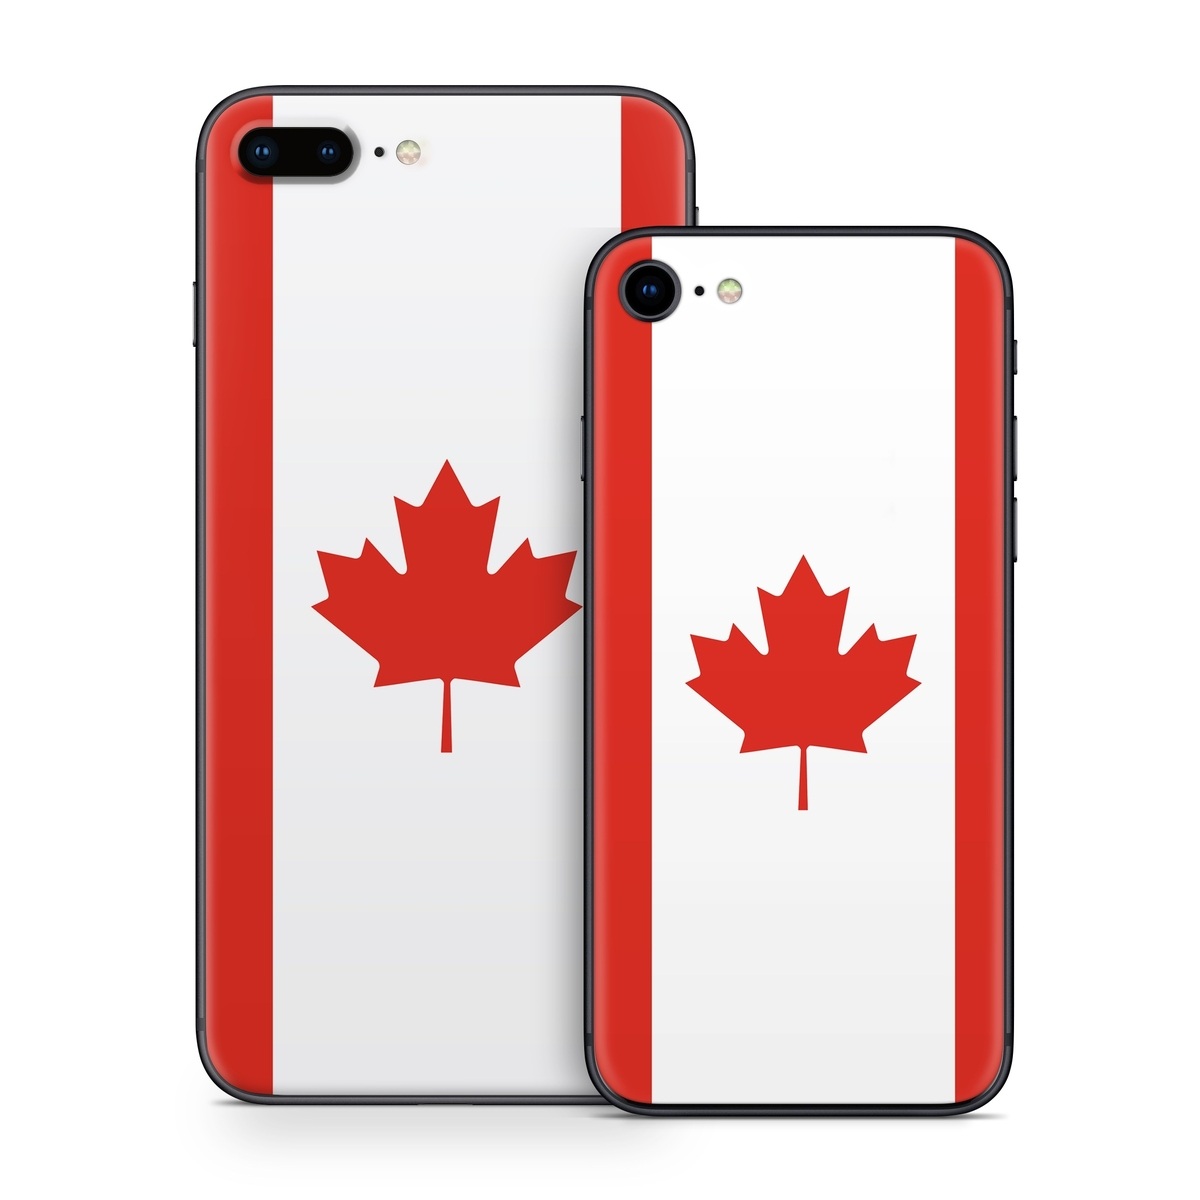 iPhone 8 Series Skin design of Red, Maple leaf, Tree, Leaf, Woody plant, Flag, Plant, Plane, Red flag, Maple, with red, white colors